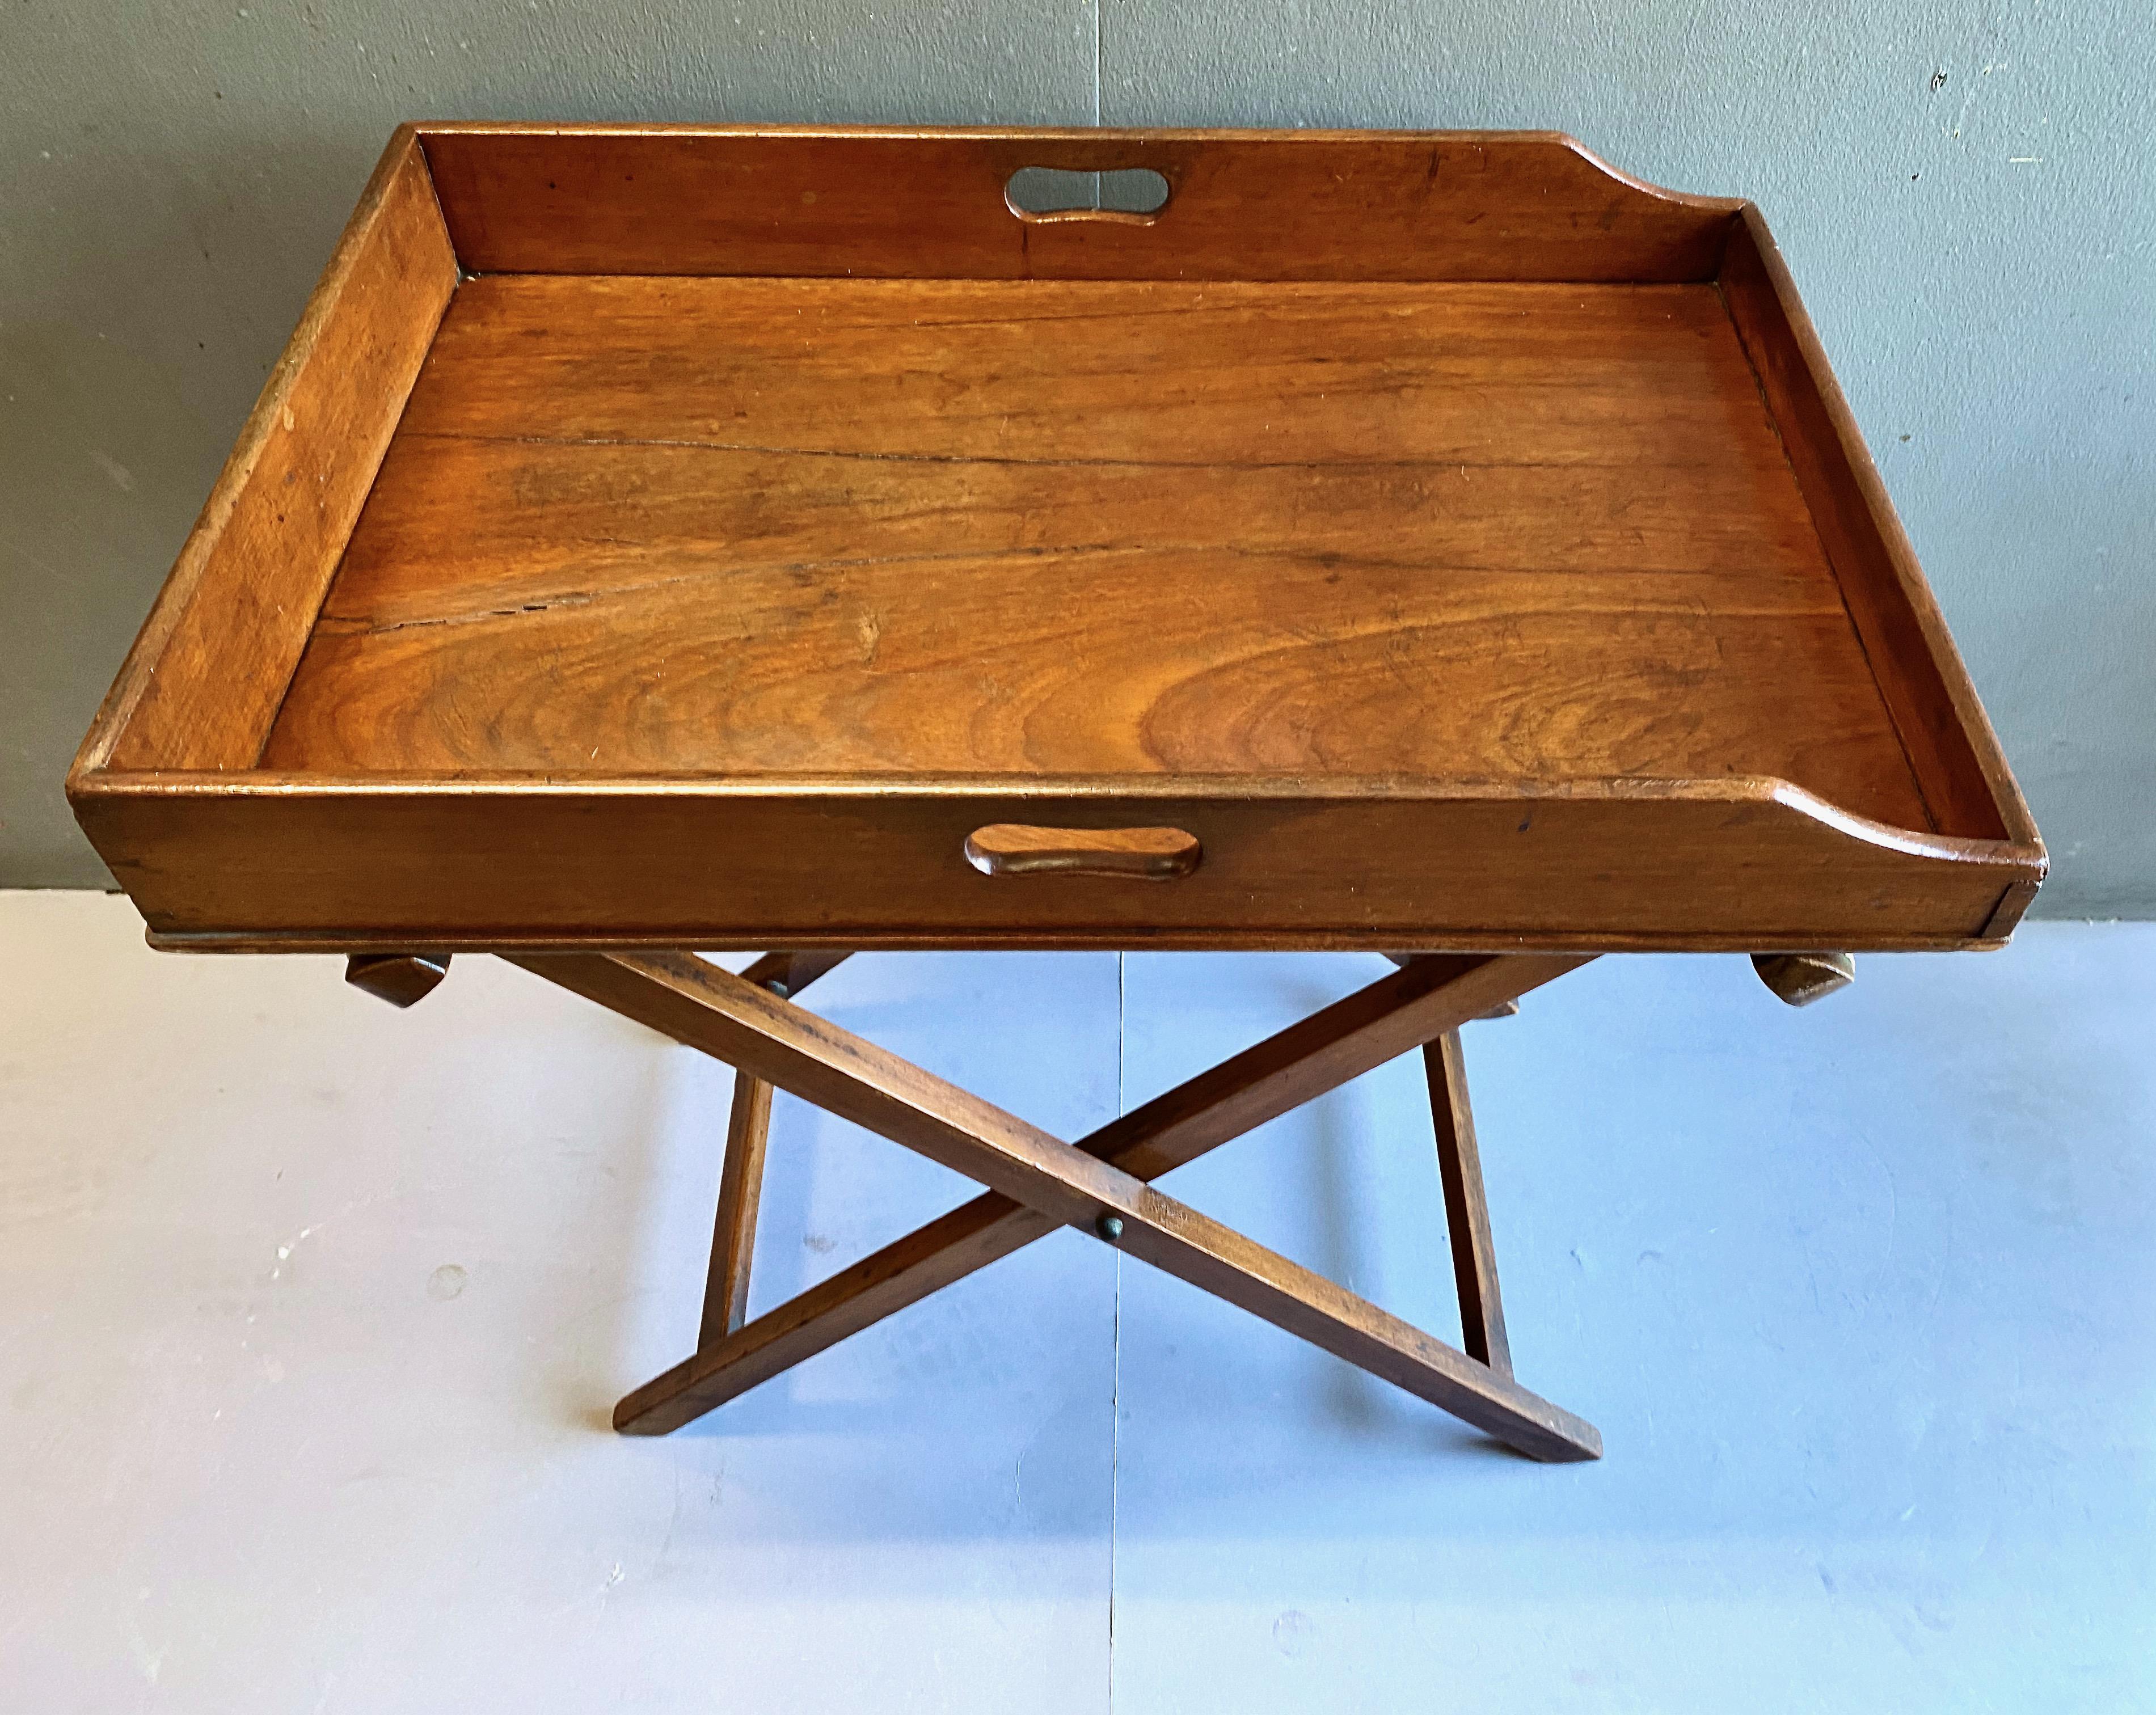 This is a classic early 19th century Mahogany Butler's Tray-On-Stand. The single board mahogany tray is framed by a 3 inch mahogany gallery on three side and a lower galley on the fourth side. The tray is in overall good condition with indications